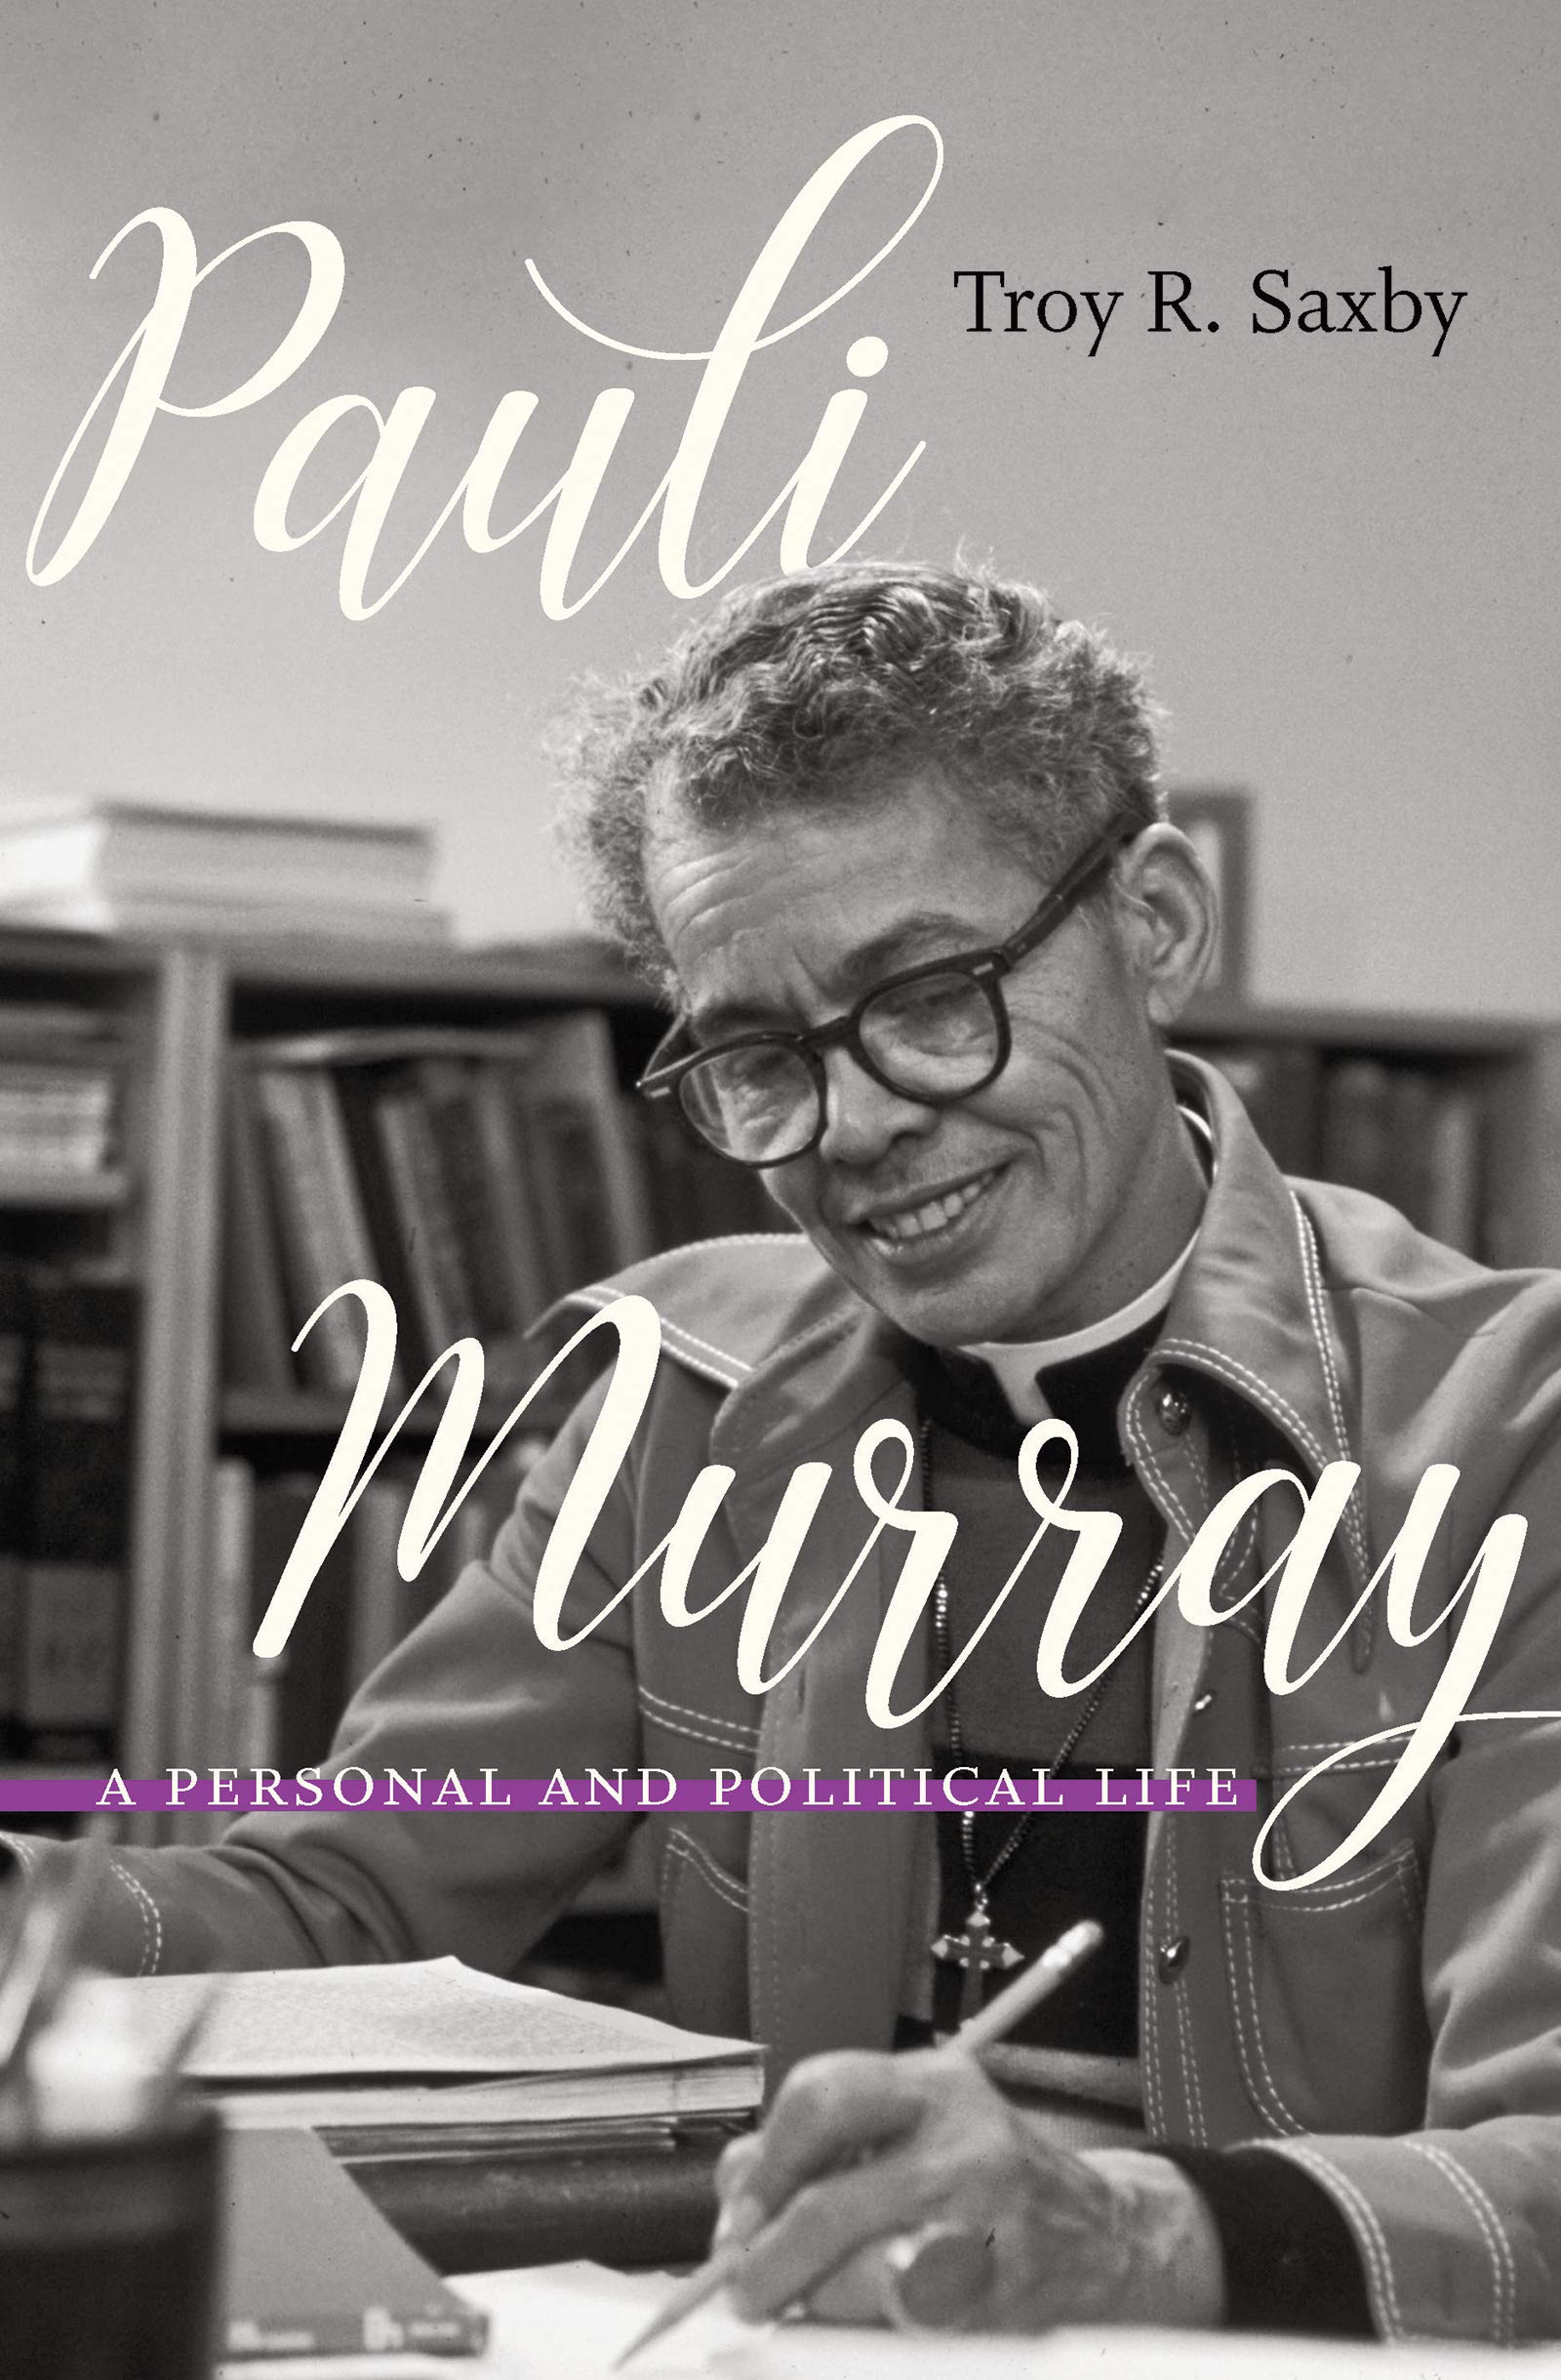 Pauli Murray A Personal and Political Life troy r saxby